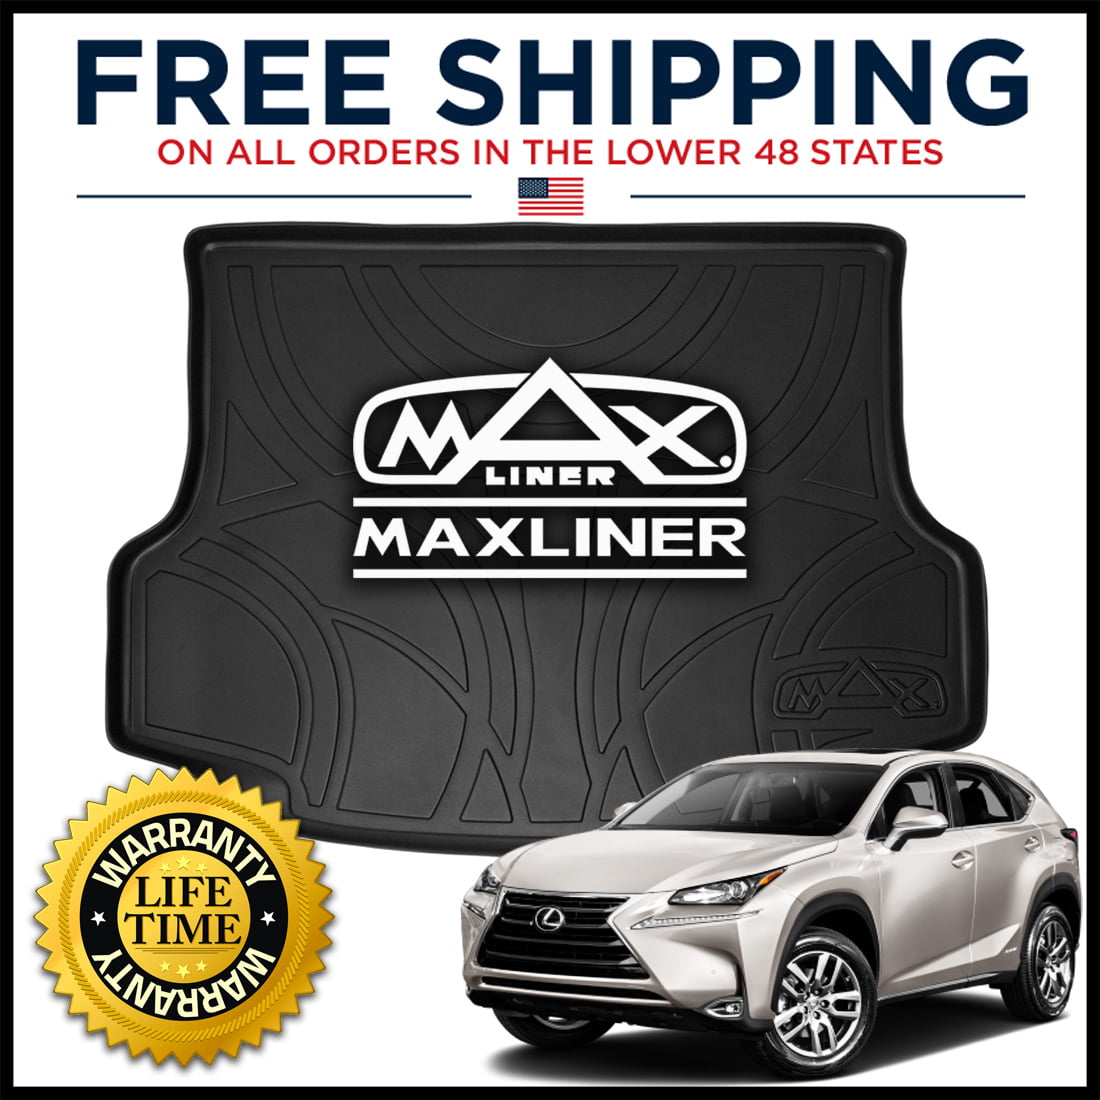 HEAVY DUTY CAR BOOT LINER COVER PROTECTOR MAT  FOR LEXUS NX300H